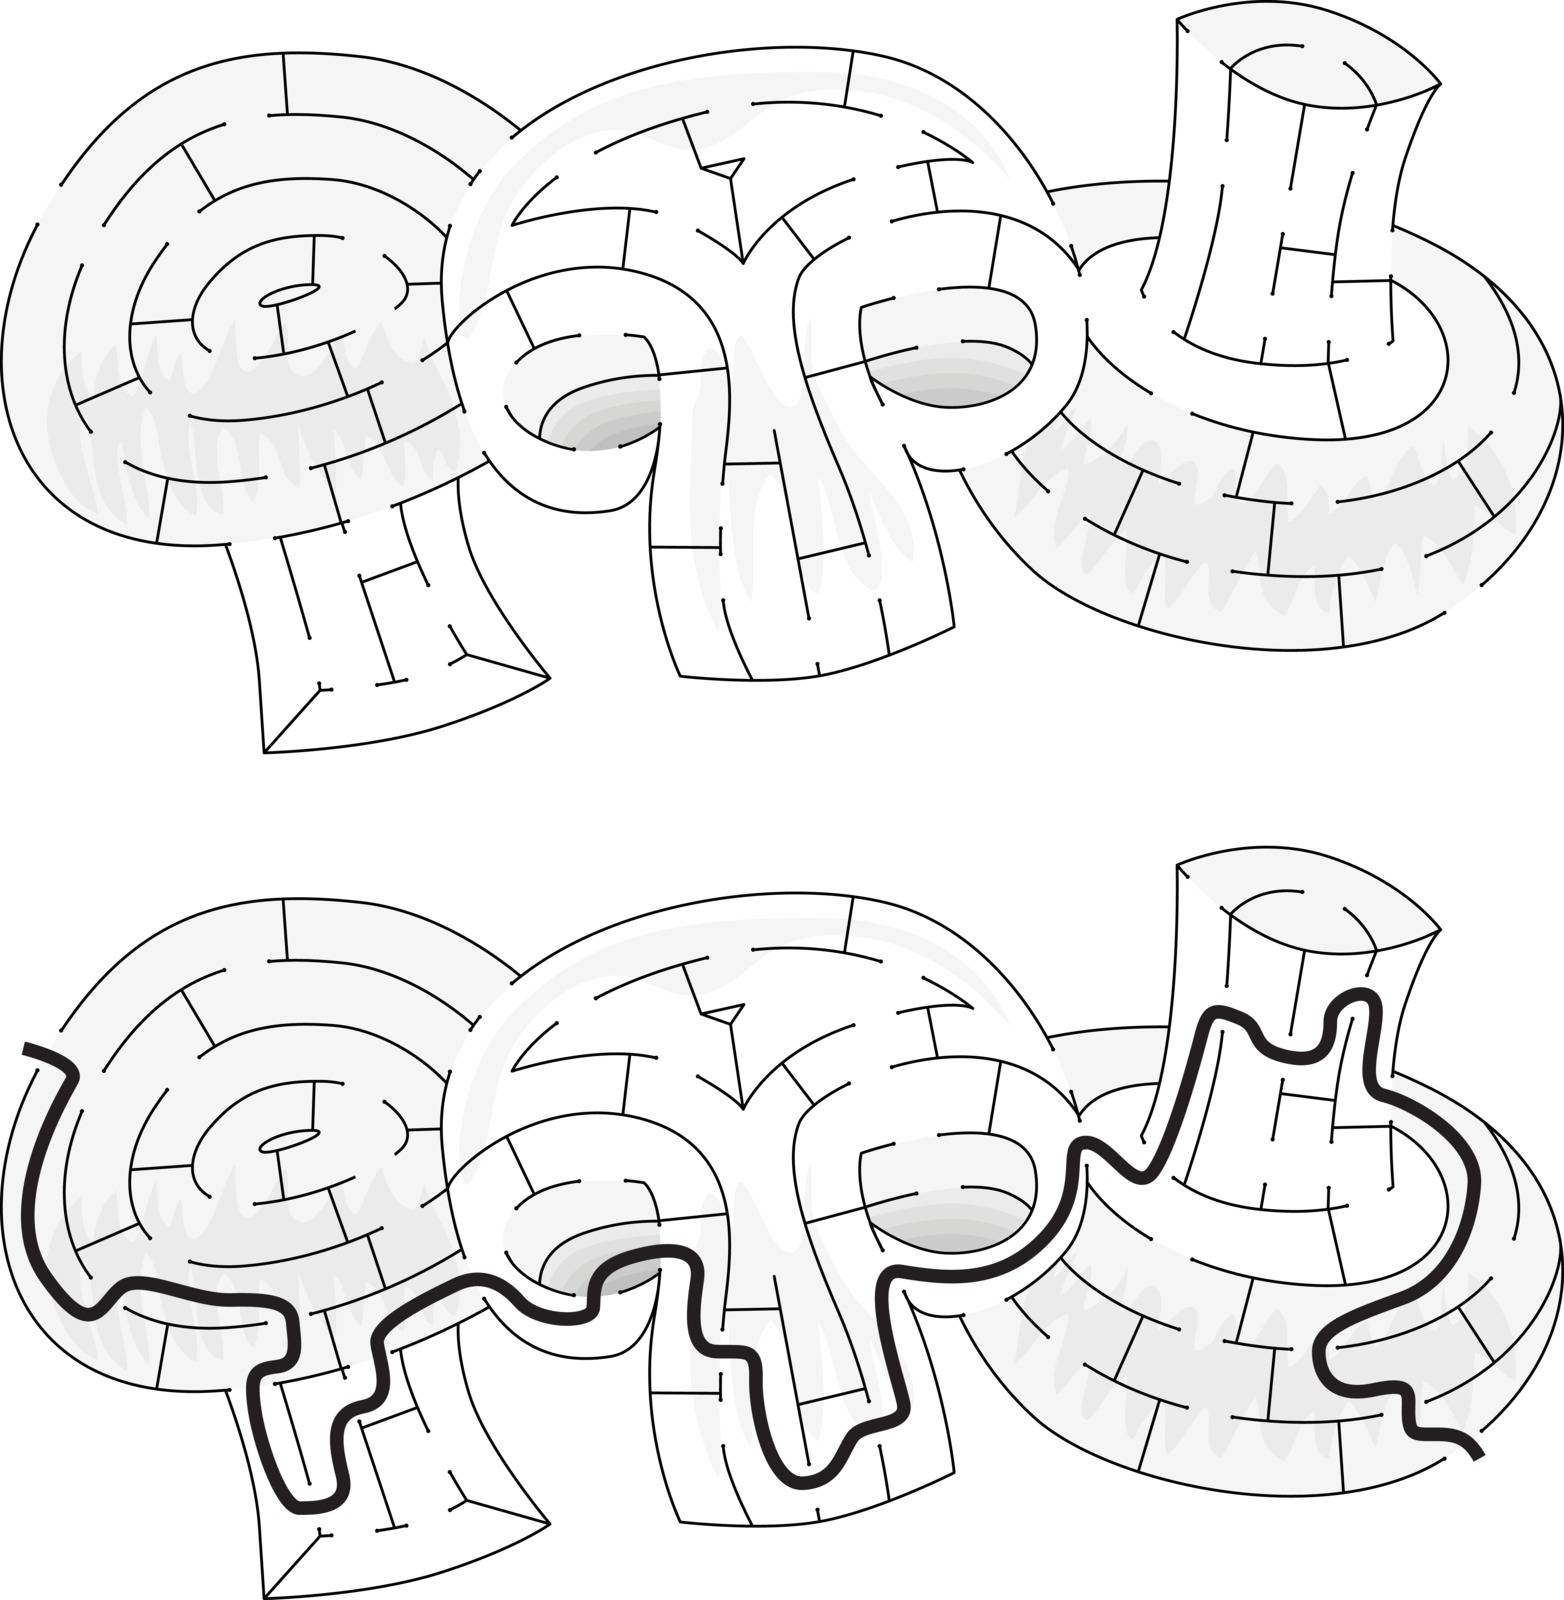 White mushrooms maze for kids with a solution in black and white